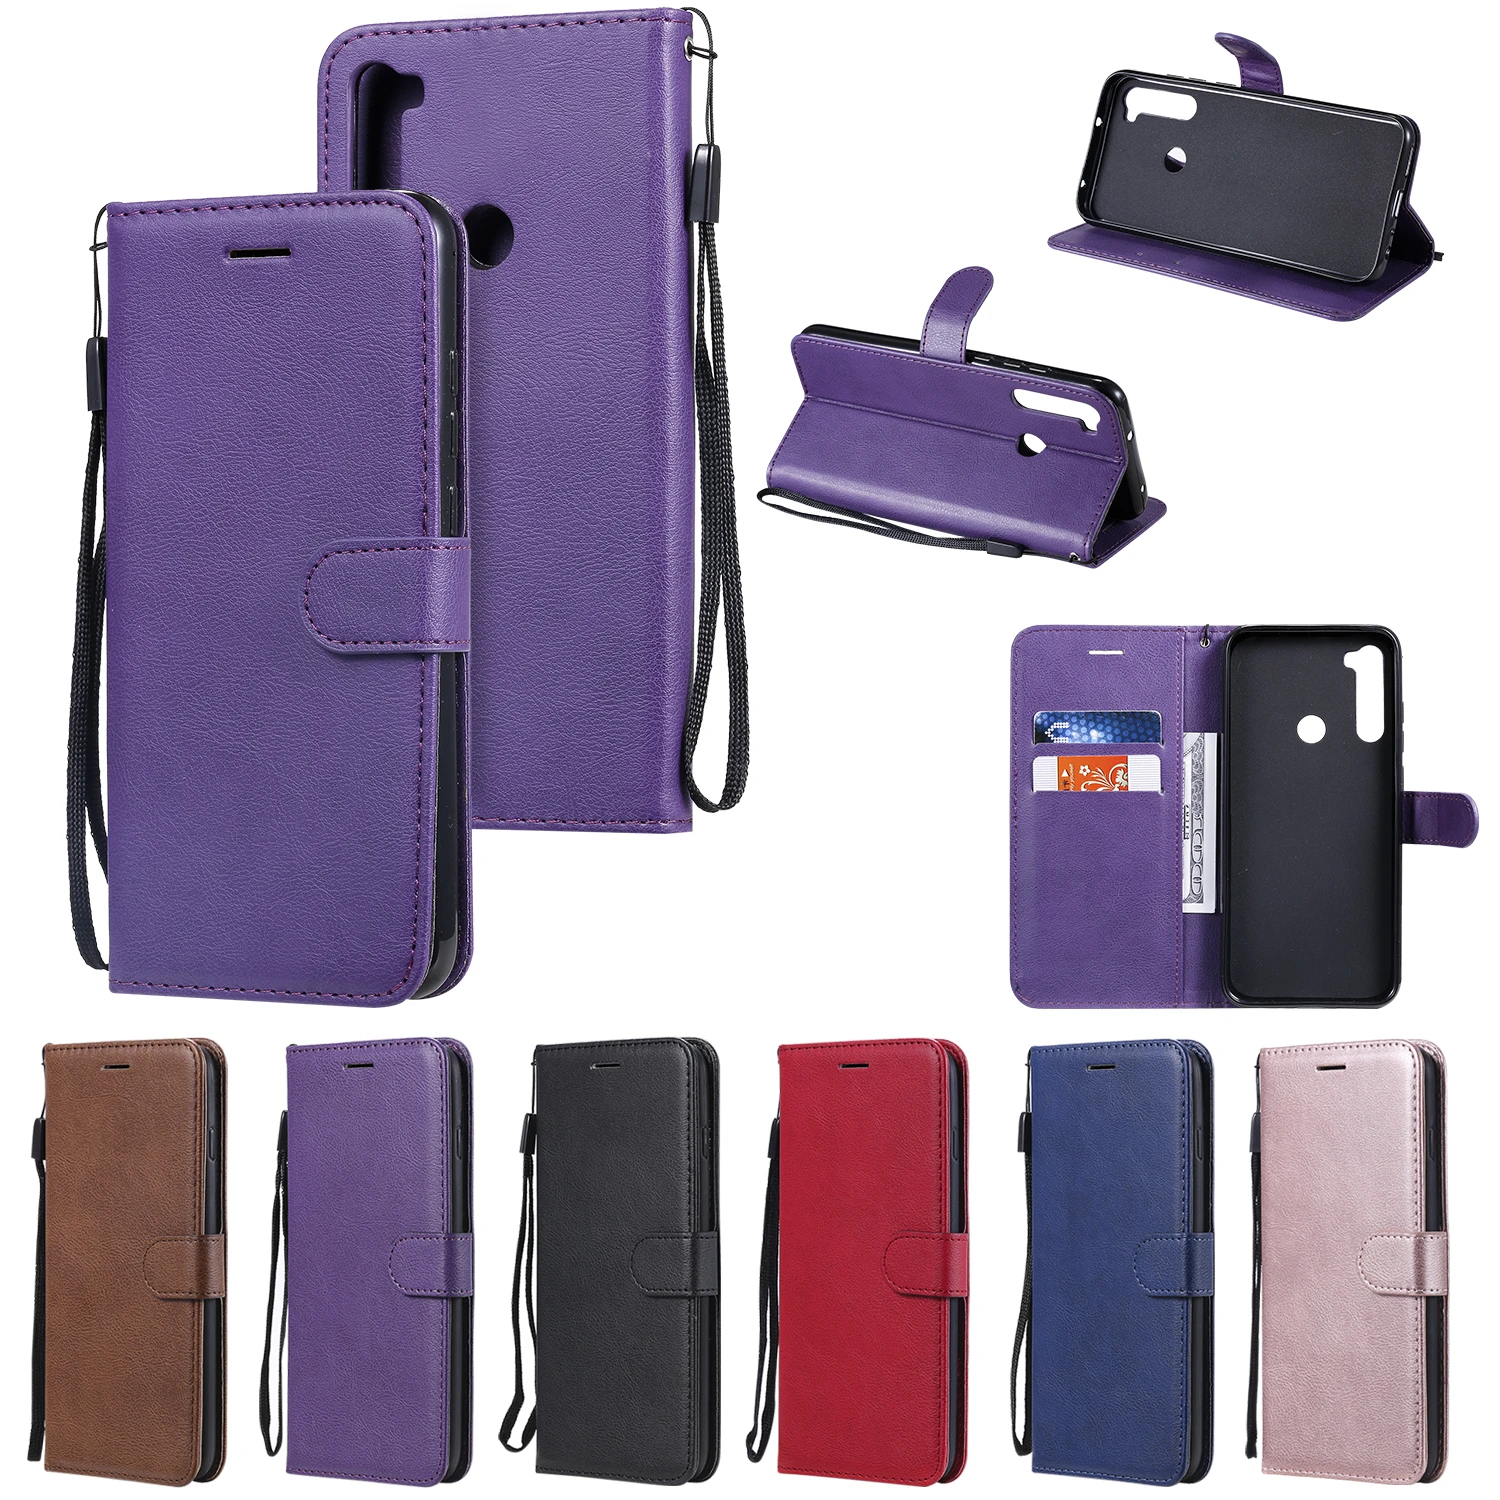 Xiaomi Redmi Note 8T Flip Leather Case on for Xiomi Redmi Note 8T 8 Pro 8A Note8T BOOK Wallet Cover Mobile Phone Bags